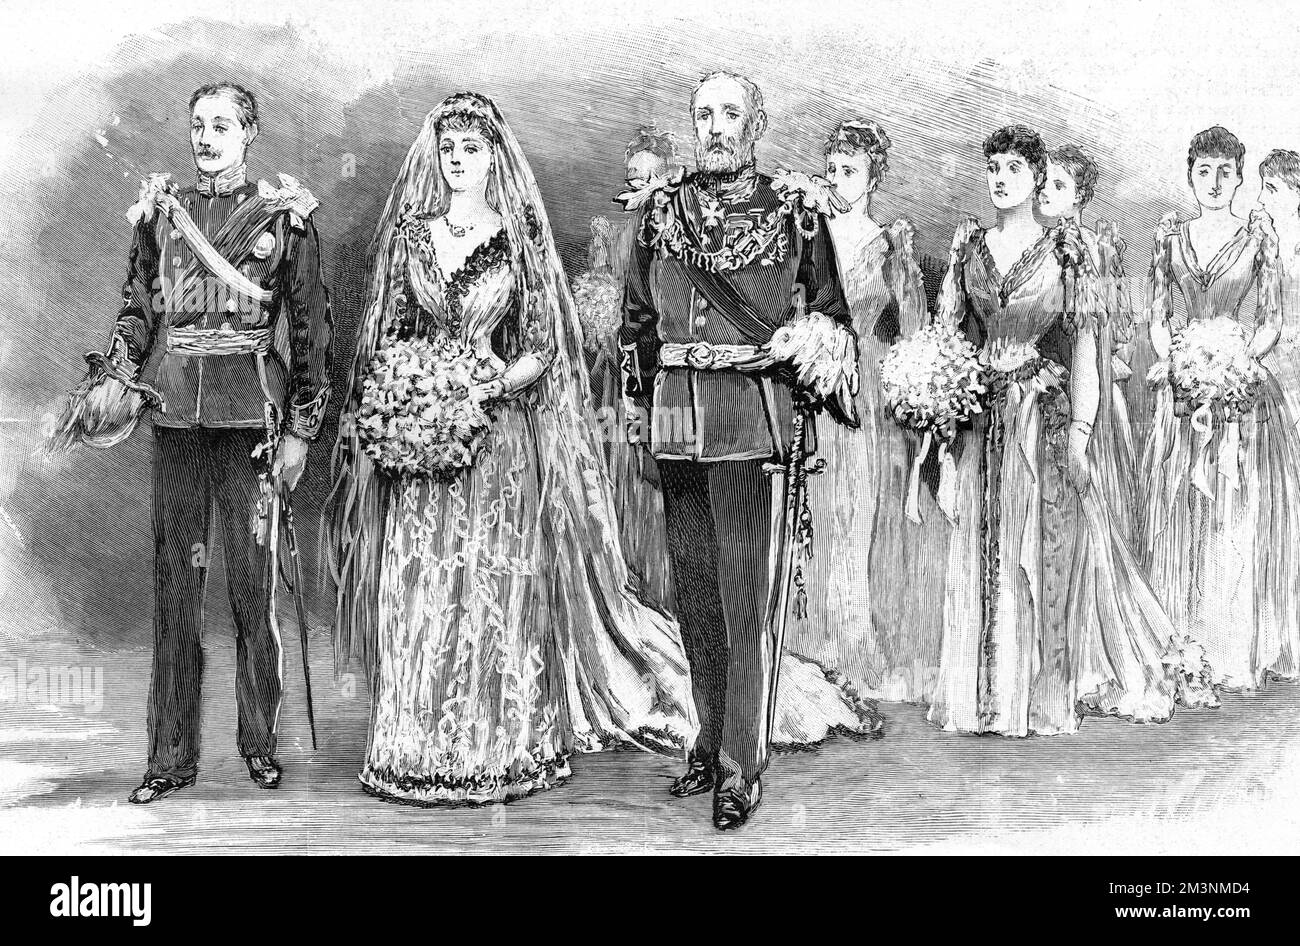 Princess Marie Louise of Schleswig-Holstein, escorted by her father, Prince Christian of Schleswig-Holstein and brother, Prince Albert, and followed by her bridesmaids makes her way down the aisle of St. George's Chapel, Windsor for her marriage to Prince Aribert of Anhalt.   Unfortunately, the unhappy marriage, which was childless, was annulled in 1900 and Marie Louise never remarried.     Date: 1891 Stock Photo